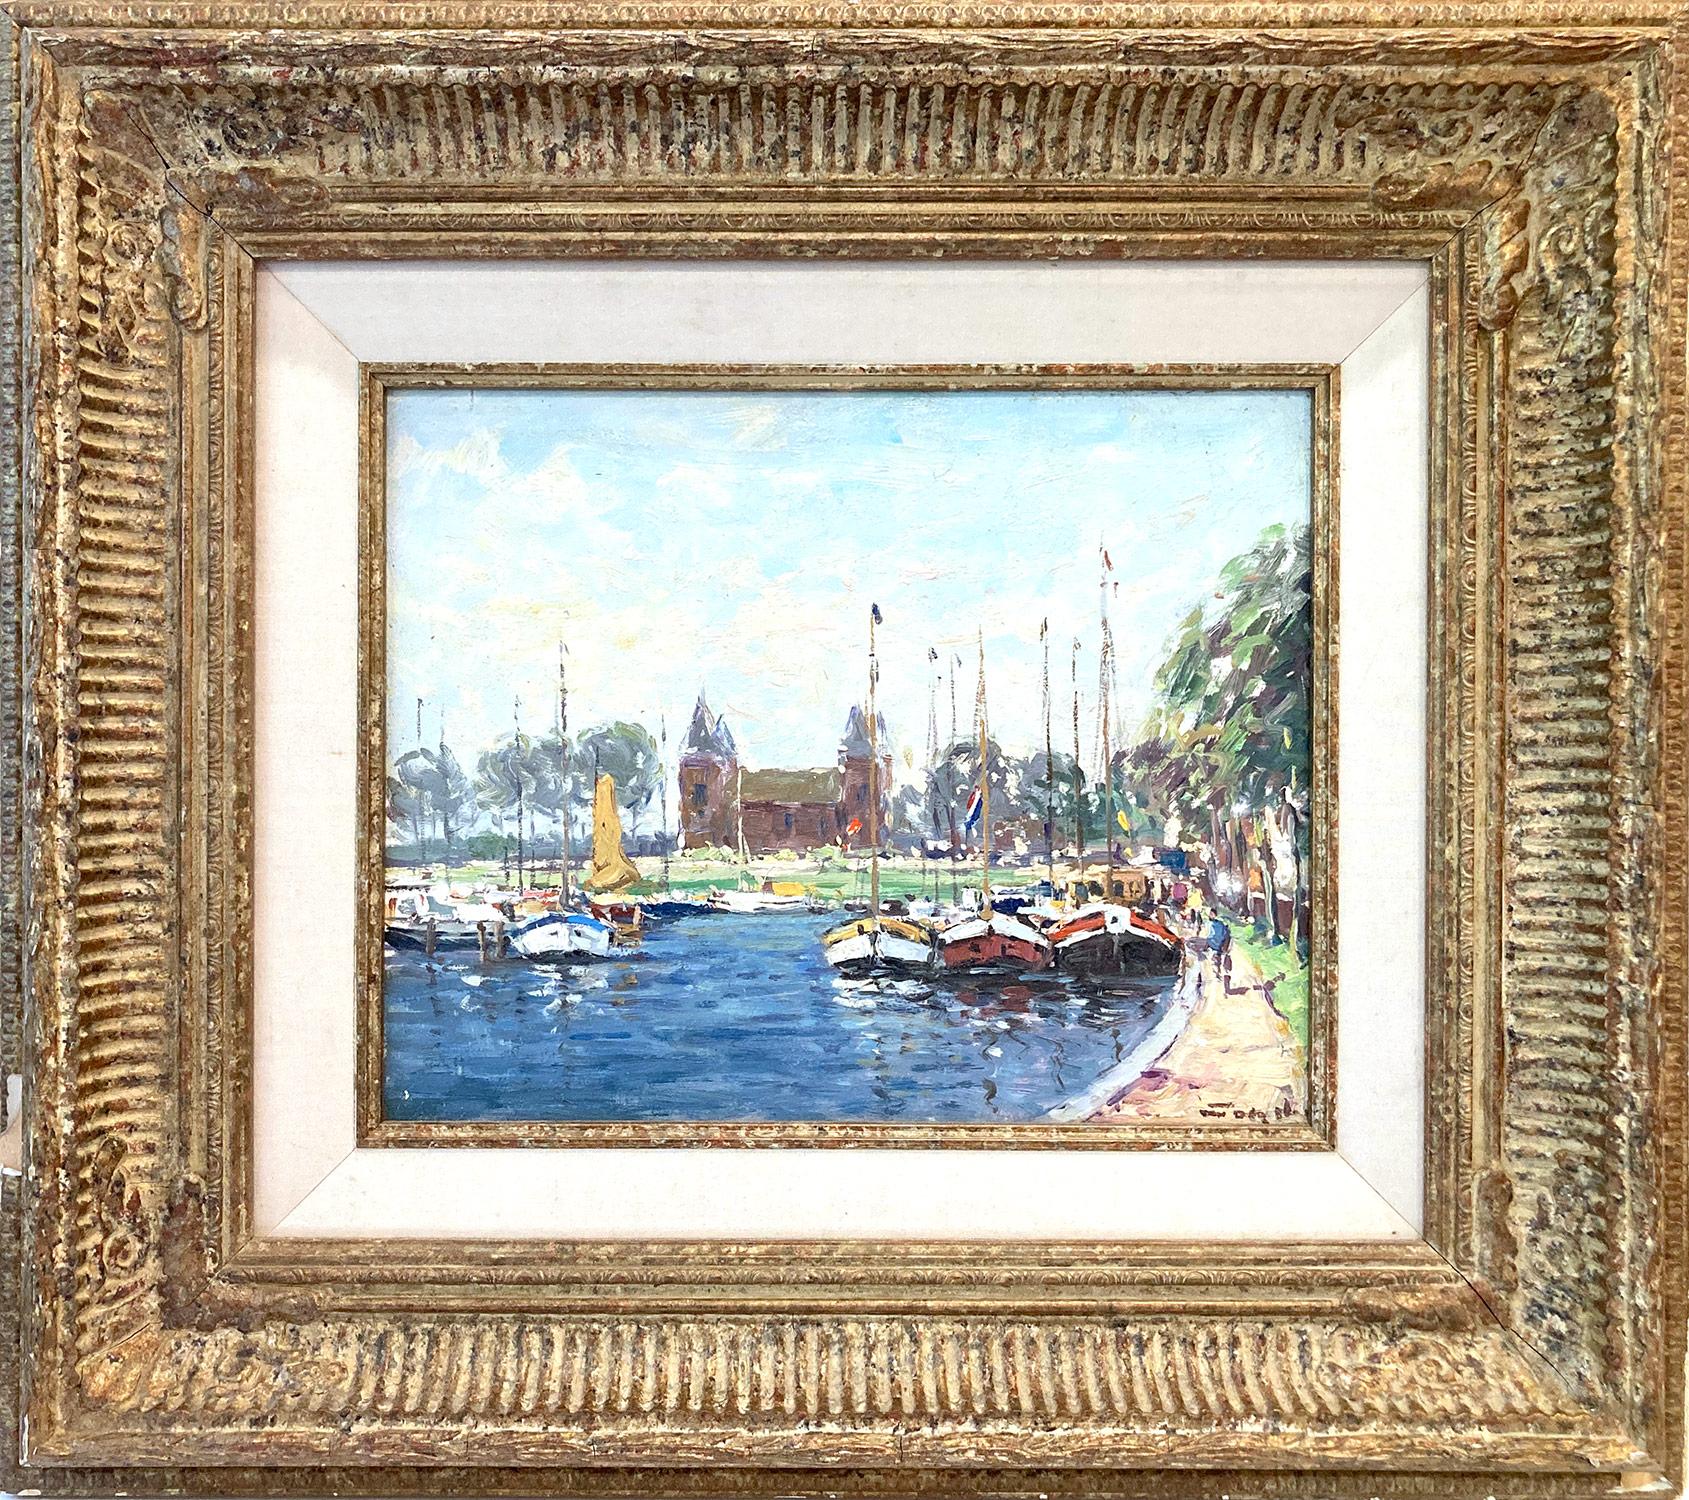 "Along the Beach" Impressionist Oil Painting with Figures and Boats along Docks